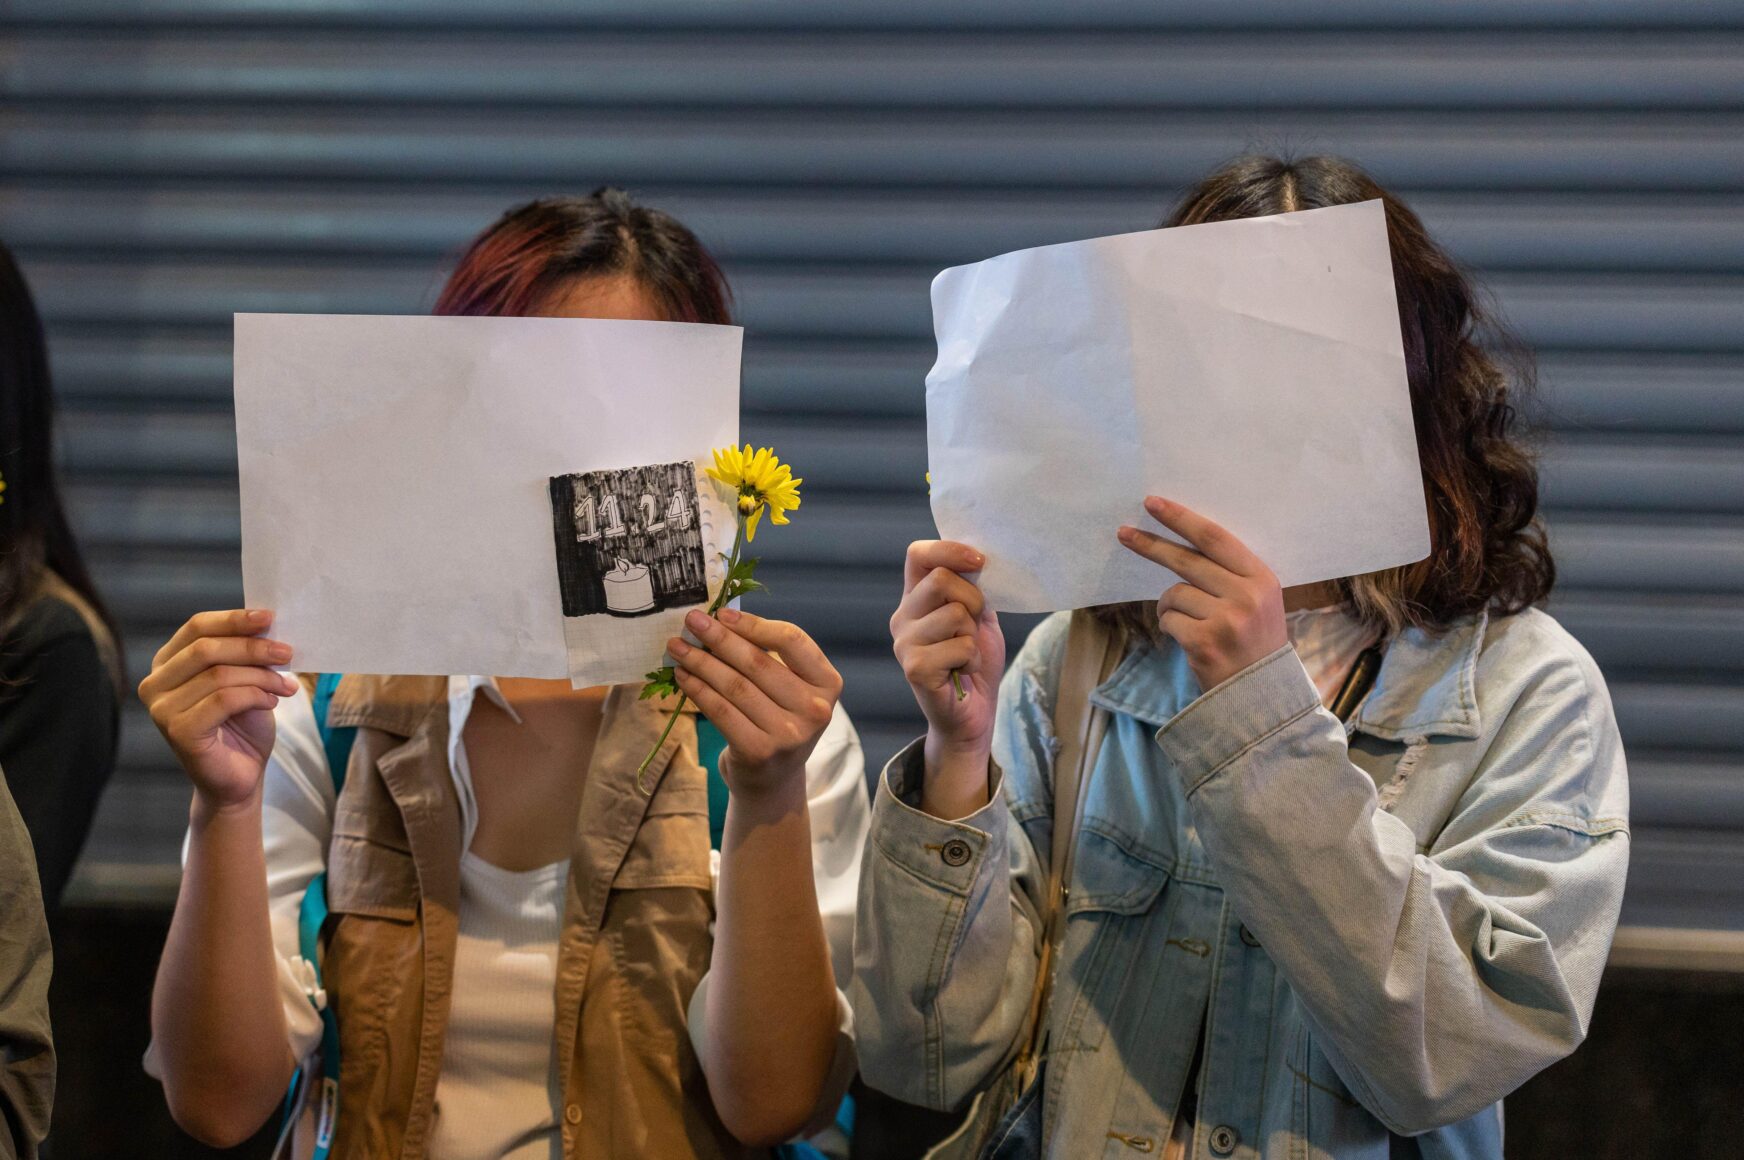 Two people hold blank pieces of paper in front of their faces.